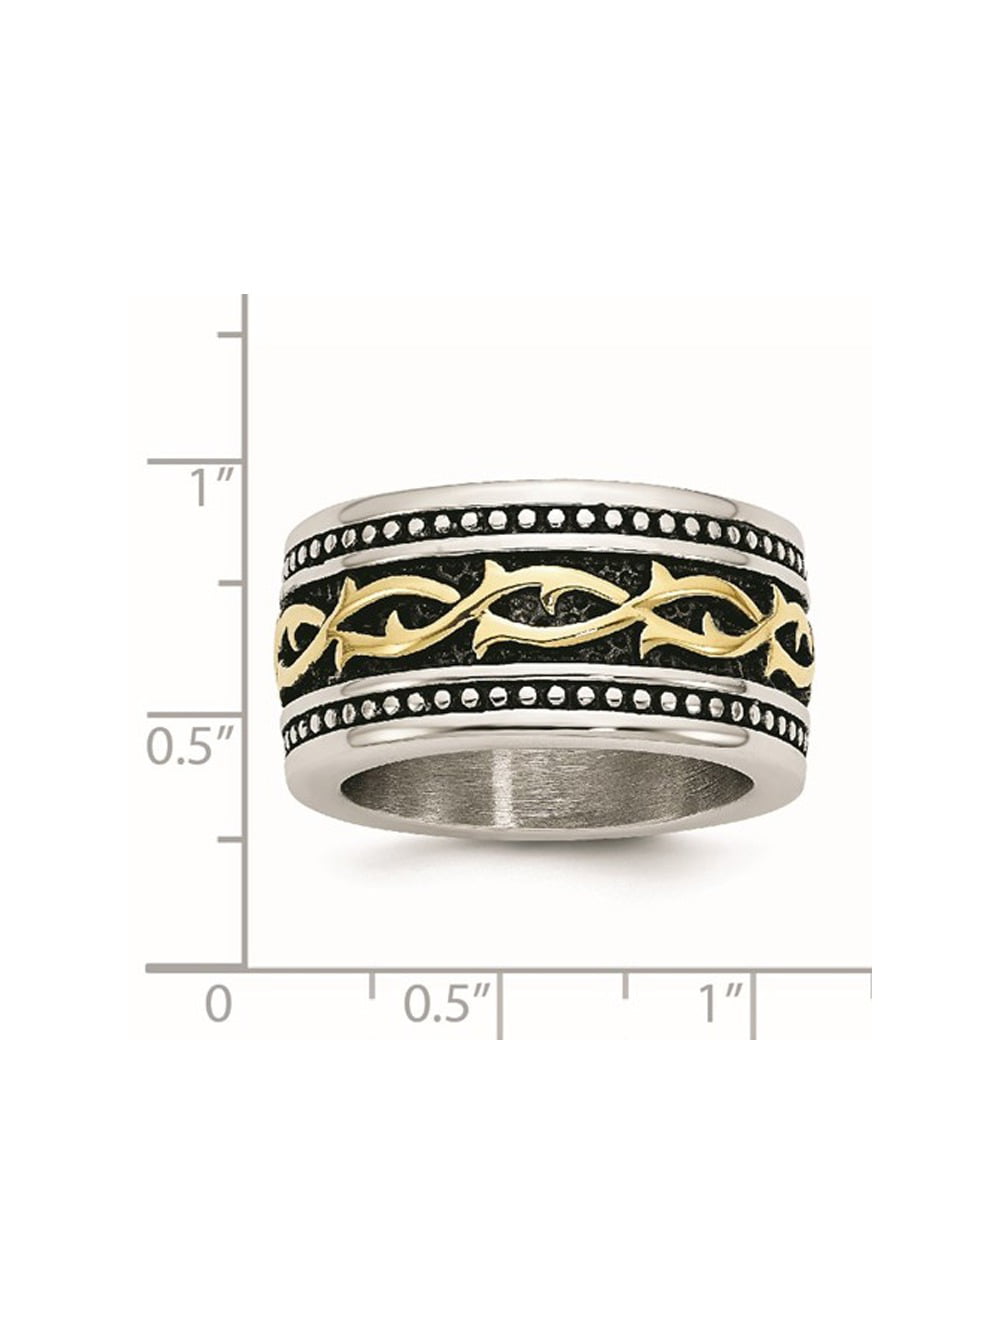 Bridal Wedding Bands Decorative Bands Stainless Steel Antiqued and Yellow IP-plated 13.25mm Ring Size 12